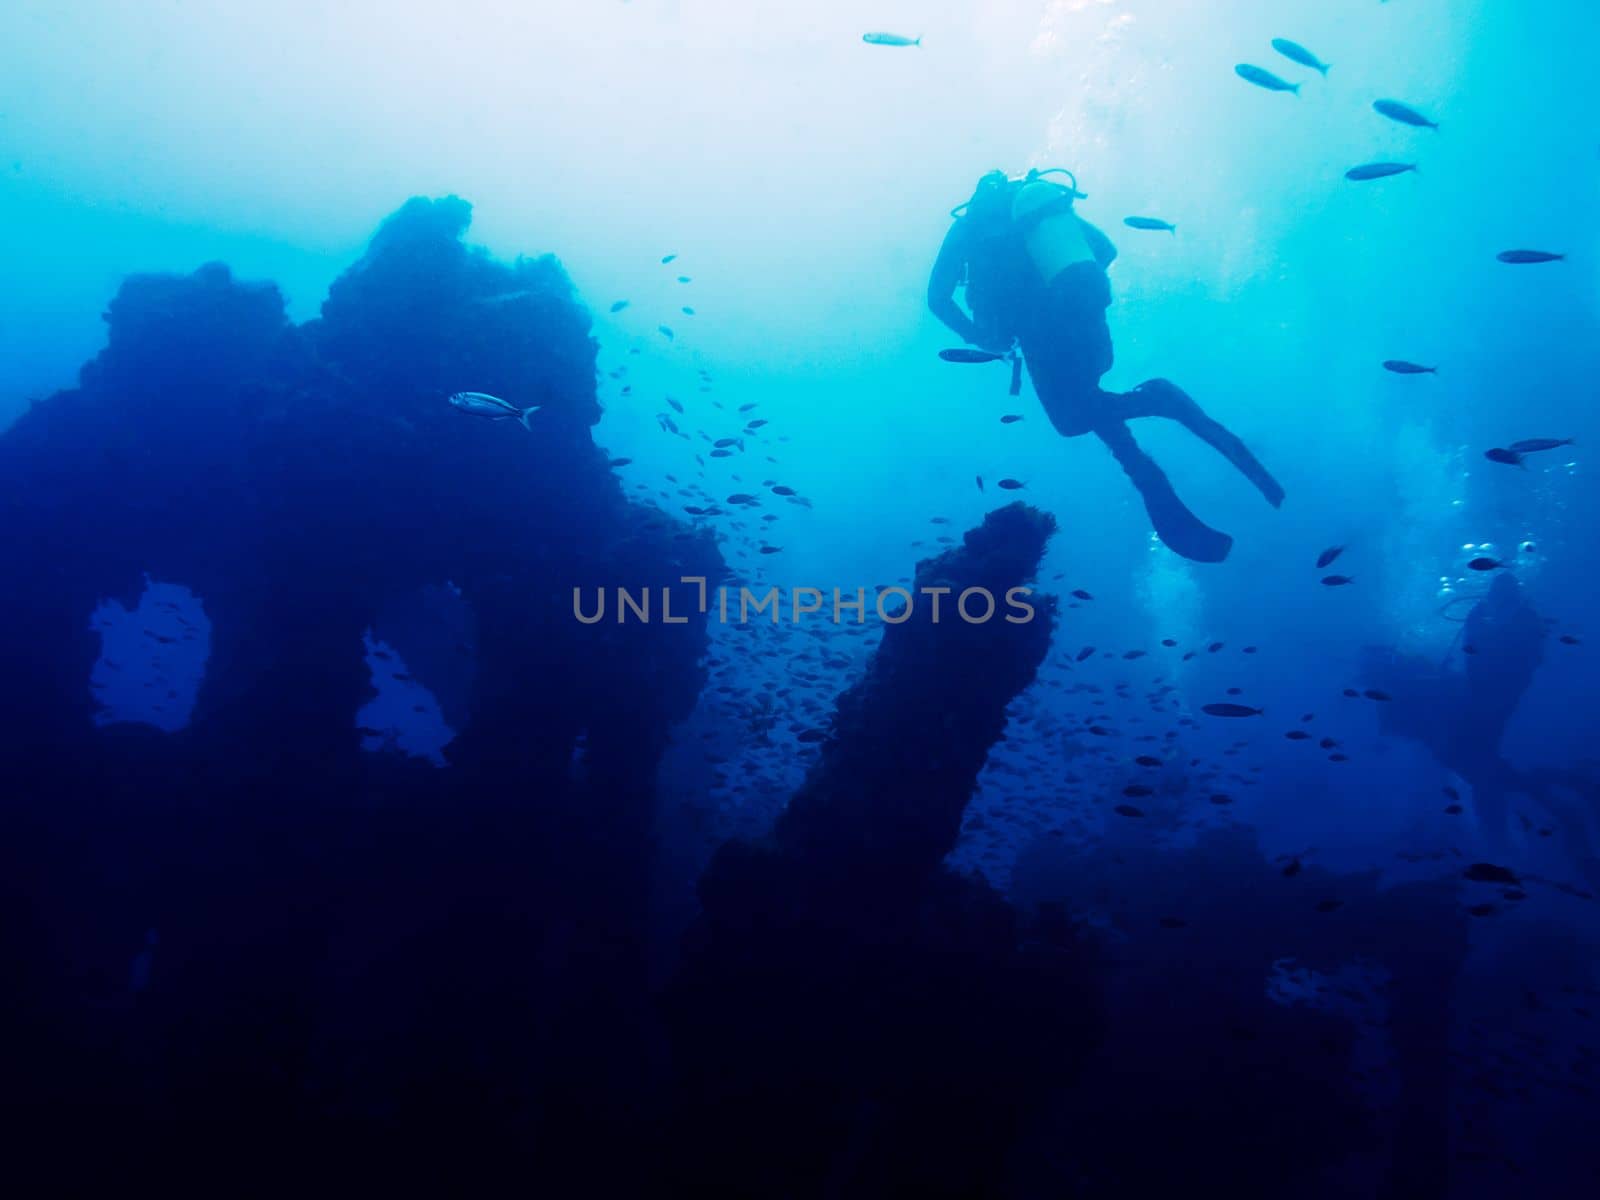 Some people dive peacefully on the old remains of a sunken ship. Hundreds of fish surround the mysterious wreck that rests at the bottom of a turbid blue sea